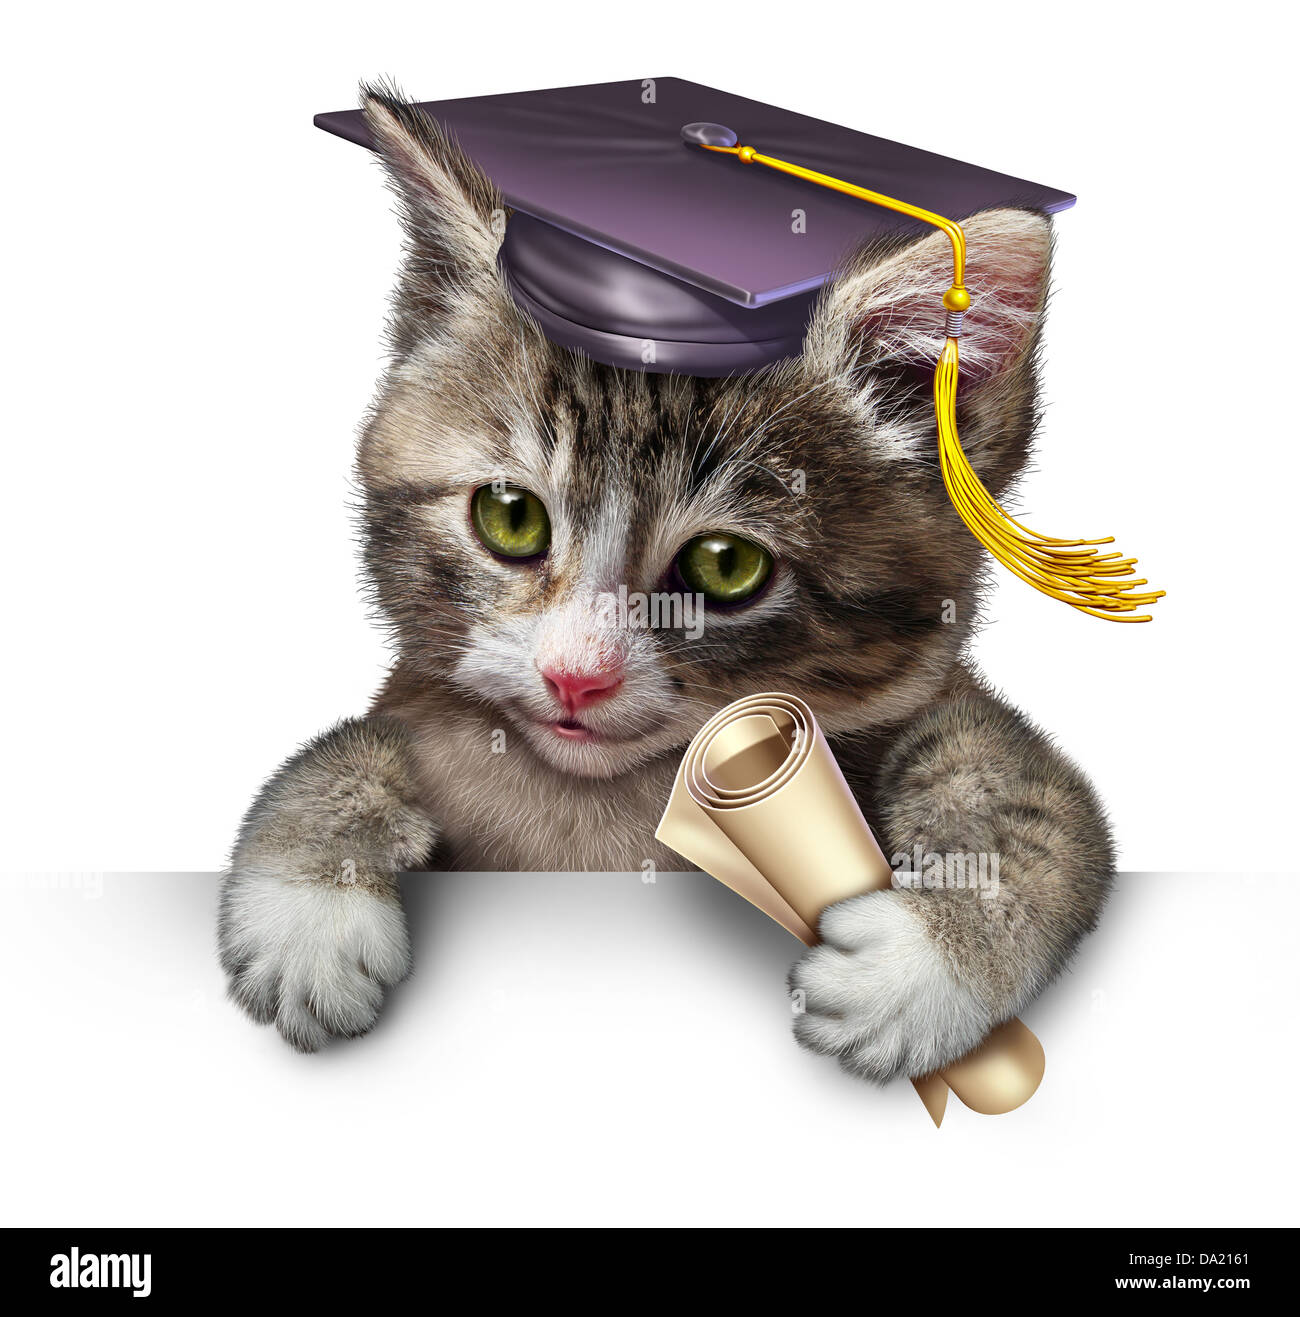 Pet school concept with a cute happy kitten wearing a graduation cap and holding a diploma as a symbol of animal training and veterinary education on a white background with blank space. Stock Photo